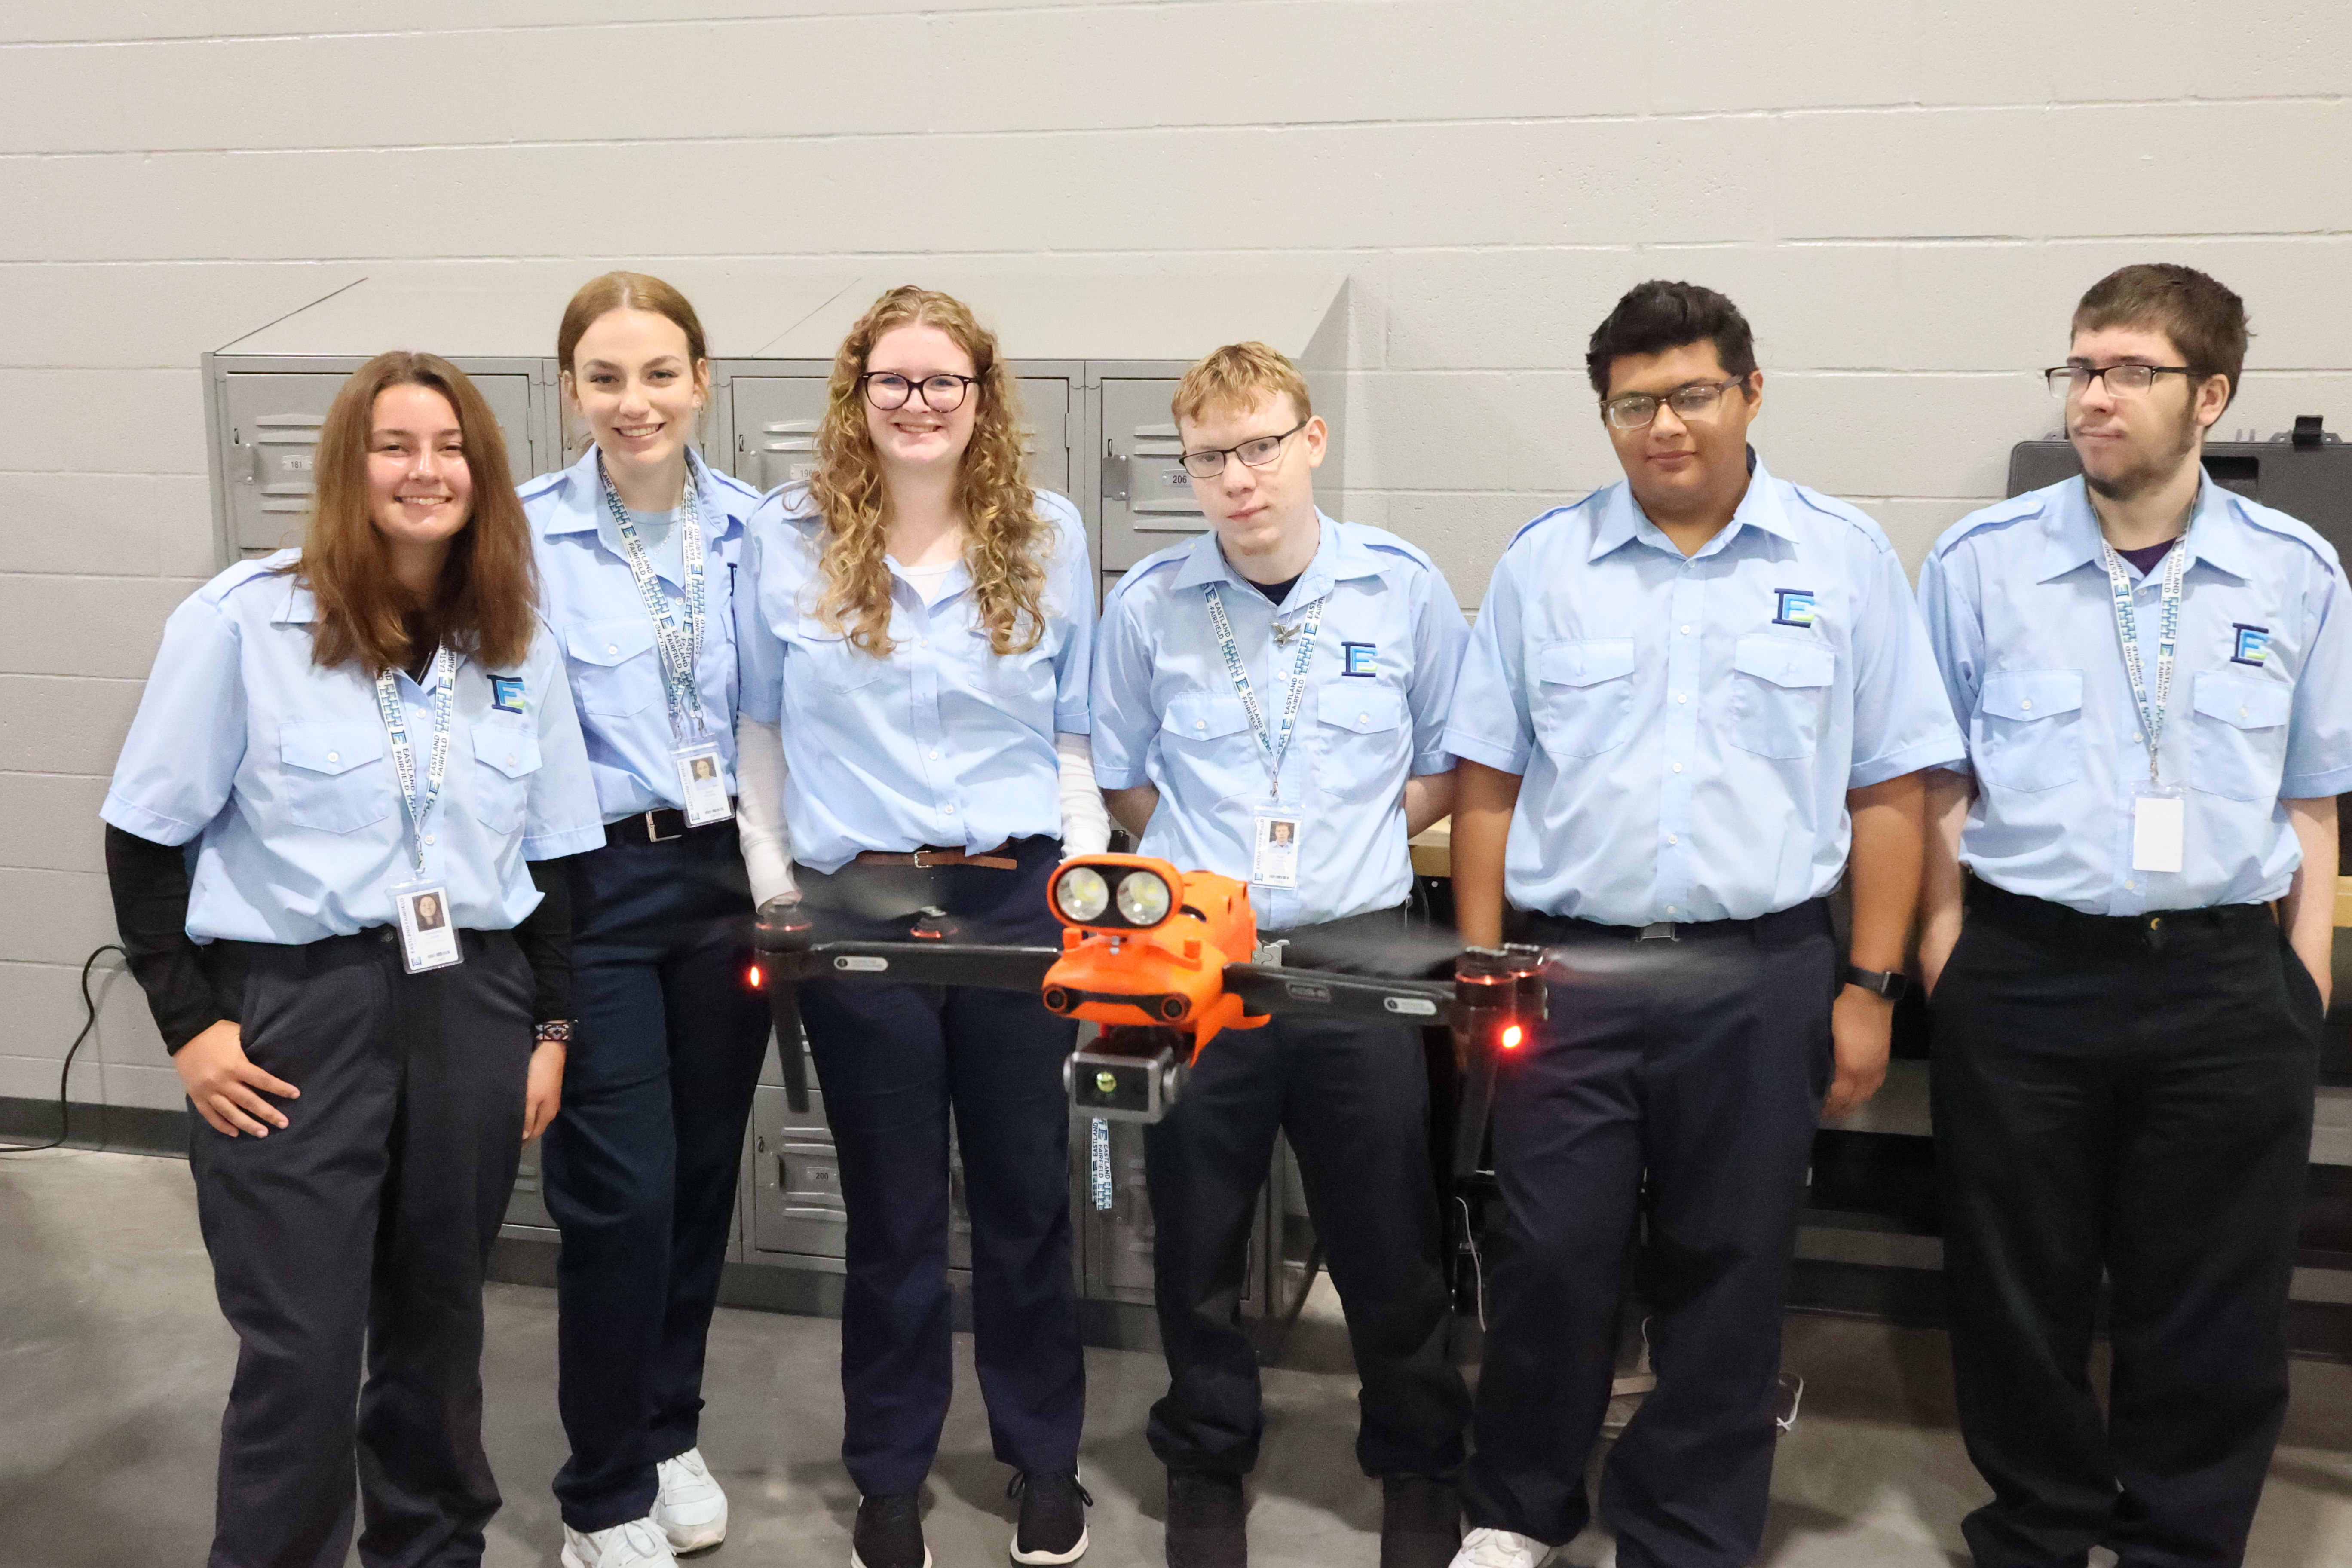 A group of five students of mixed backgrounds lines up behind a drone that is flying in front of them.